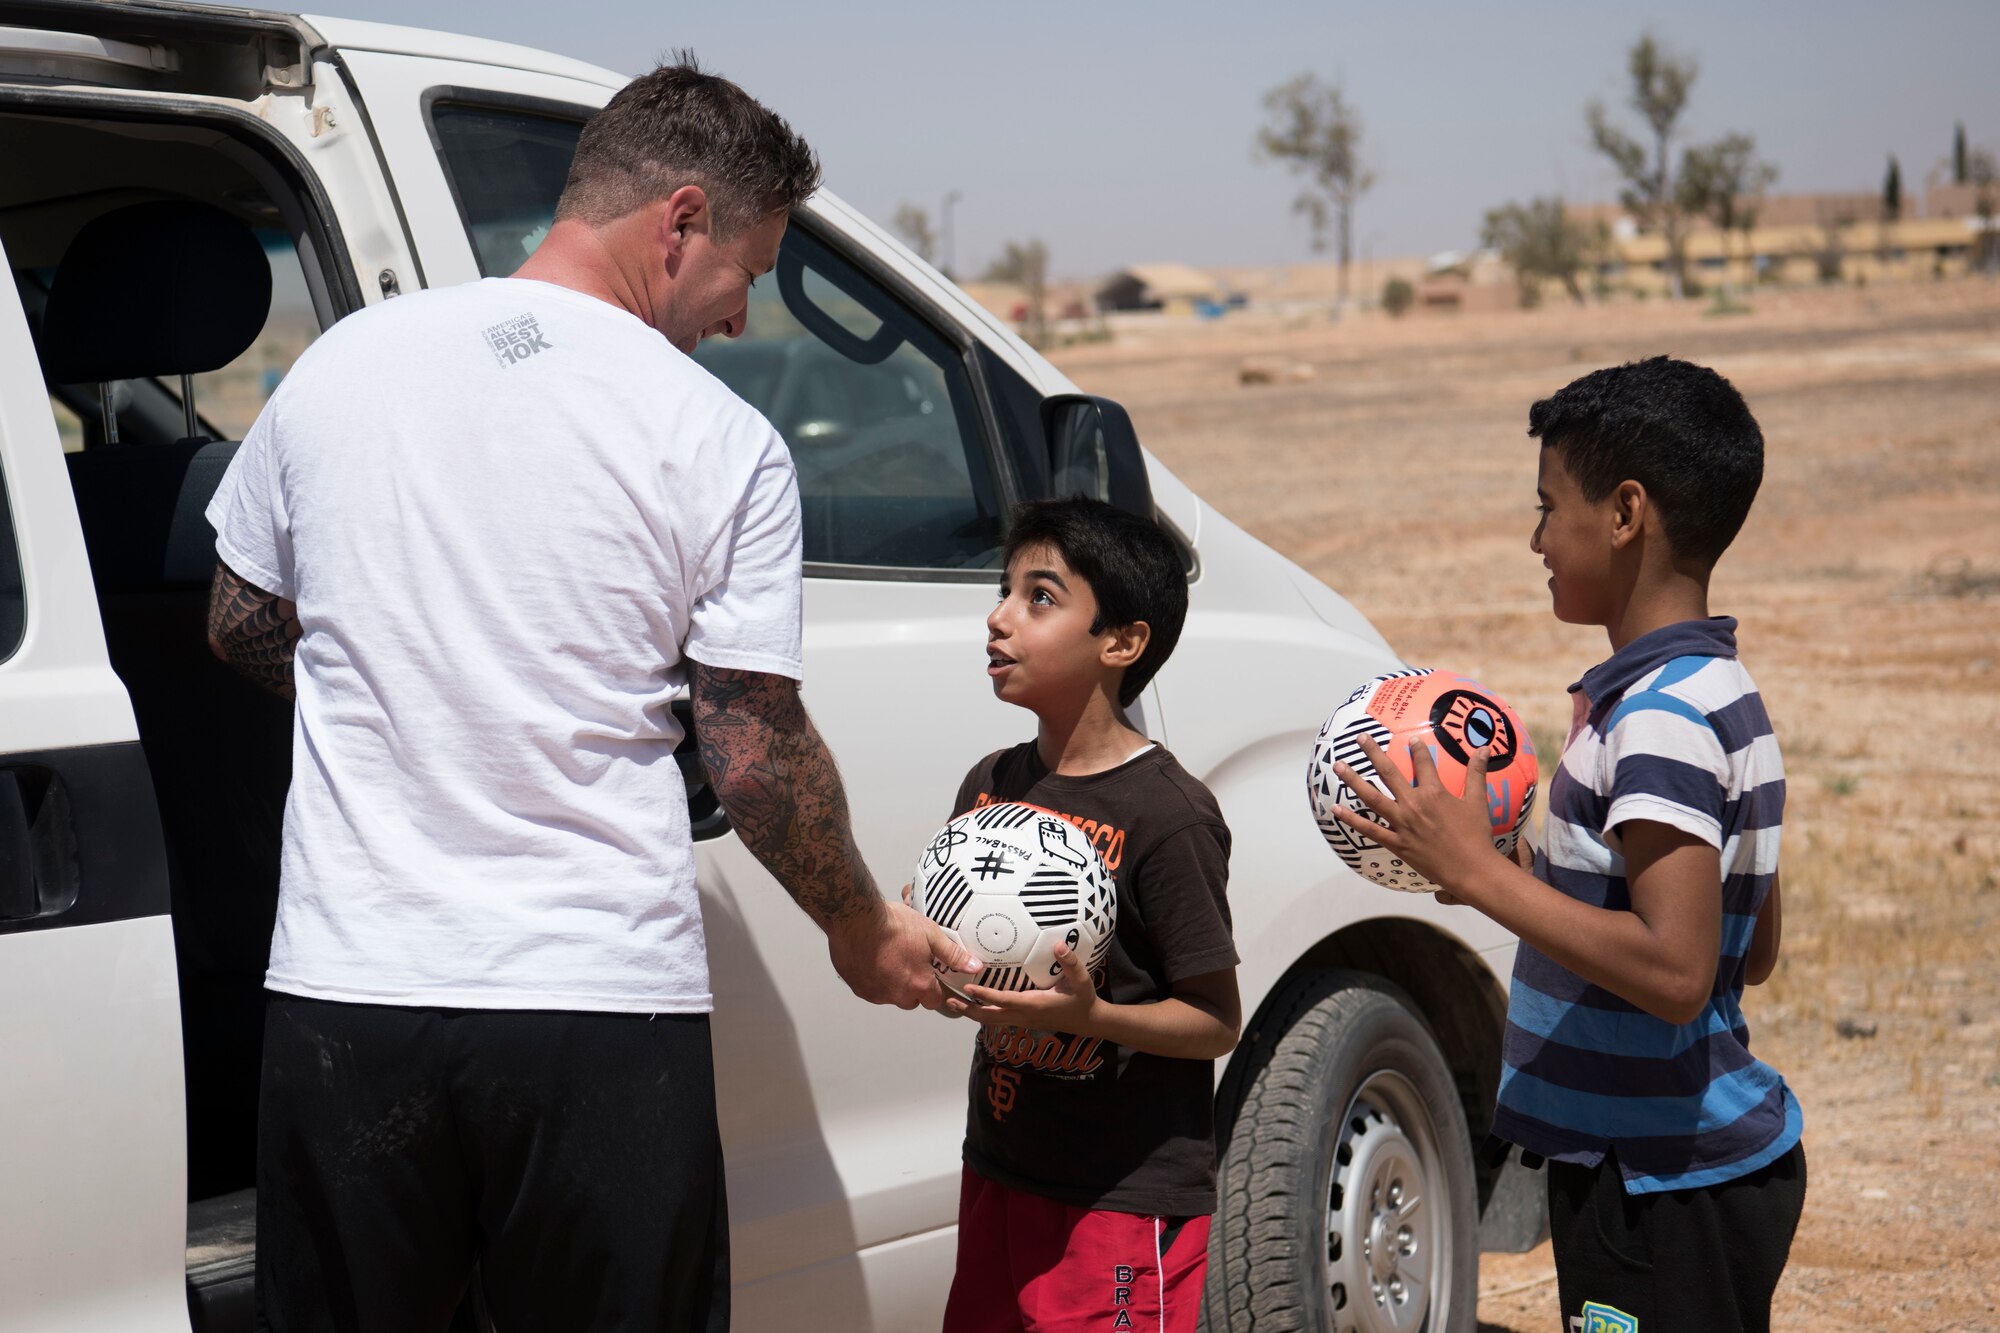 Senior Airman Timothy Jones, 332nd Expeditionary Medical Group medical logistician, hands out donated soccer balls to local kids at an undisclosed location in Southwest Asia May 26, 2018.